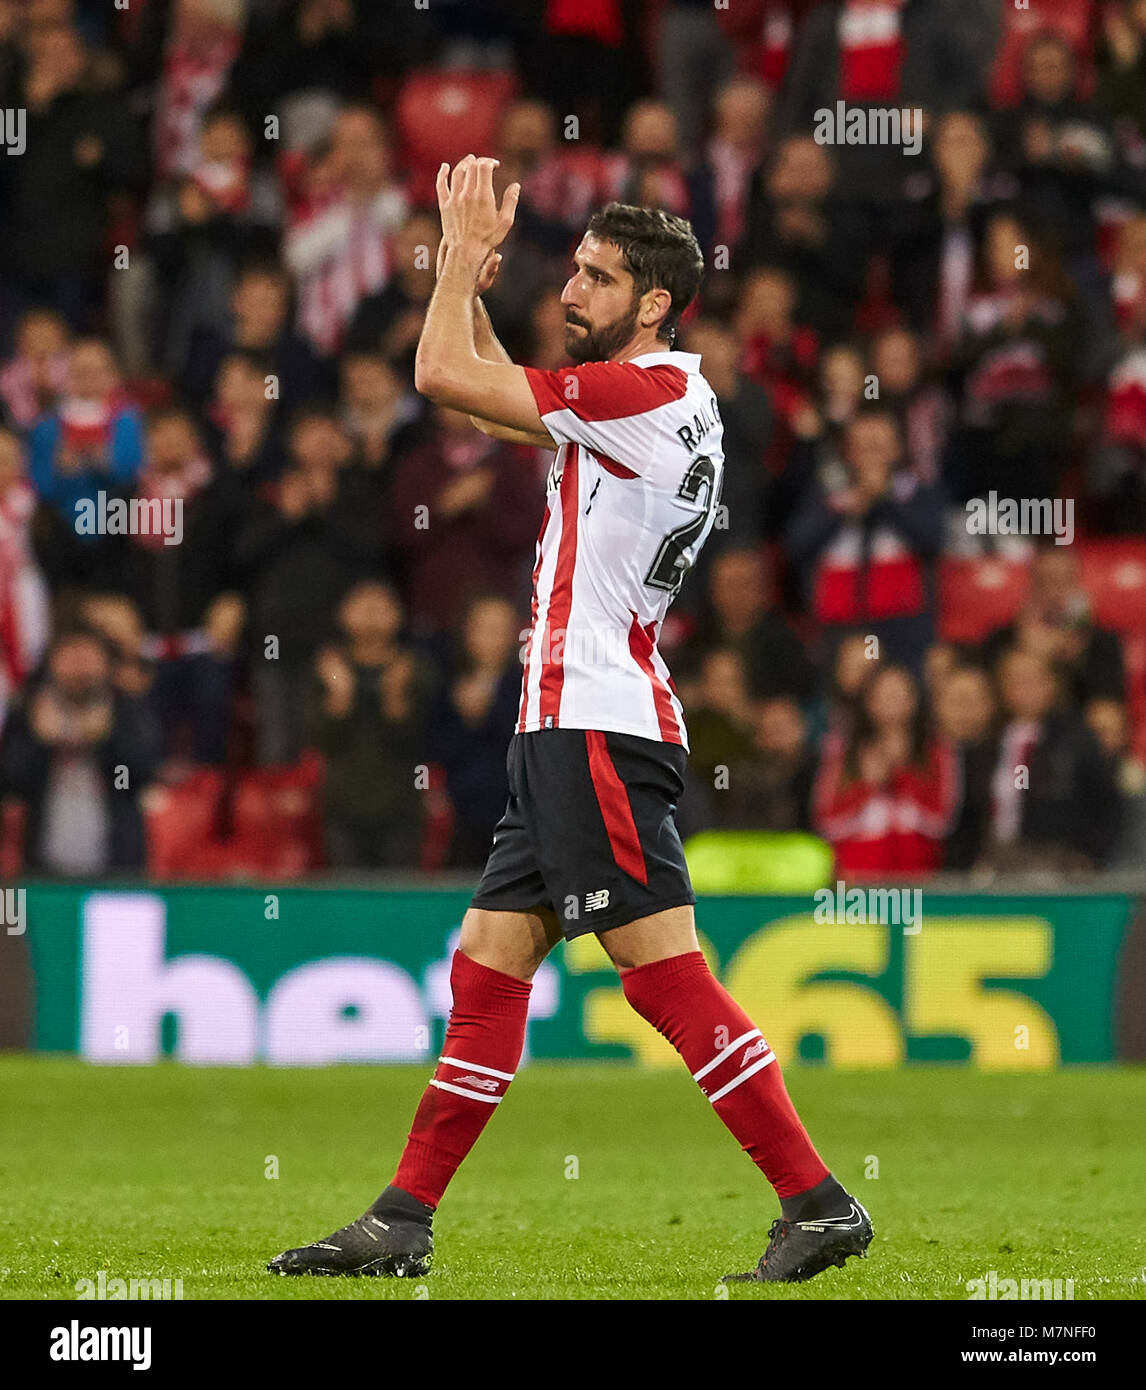 (22) Raul Garcia during the Spanish La Liga soccer match between Athletic Club Bilbao and C.D Leganes at San Mames stadium, in Bilbao, northern Spain, Sunday, March, 11, 2018. Credit: Gtres Información más Comuniación on line, S.L./Alamy Live News Stock Photo